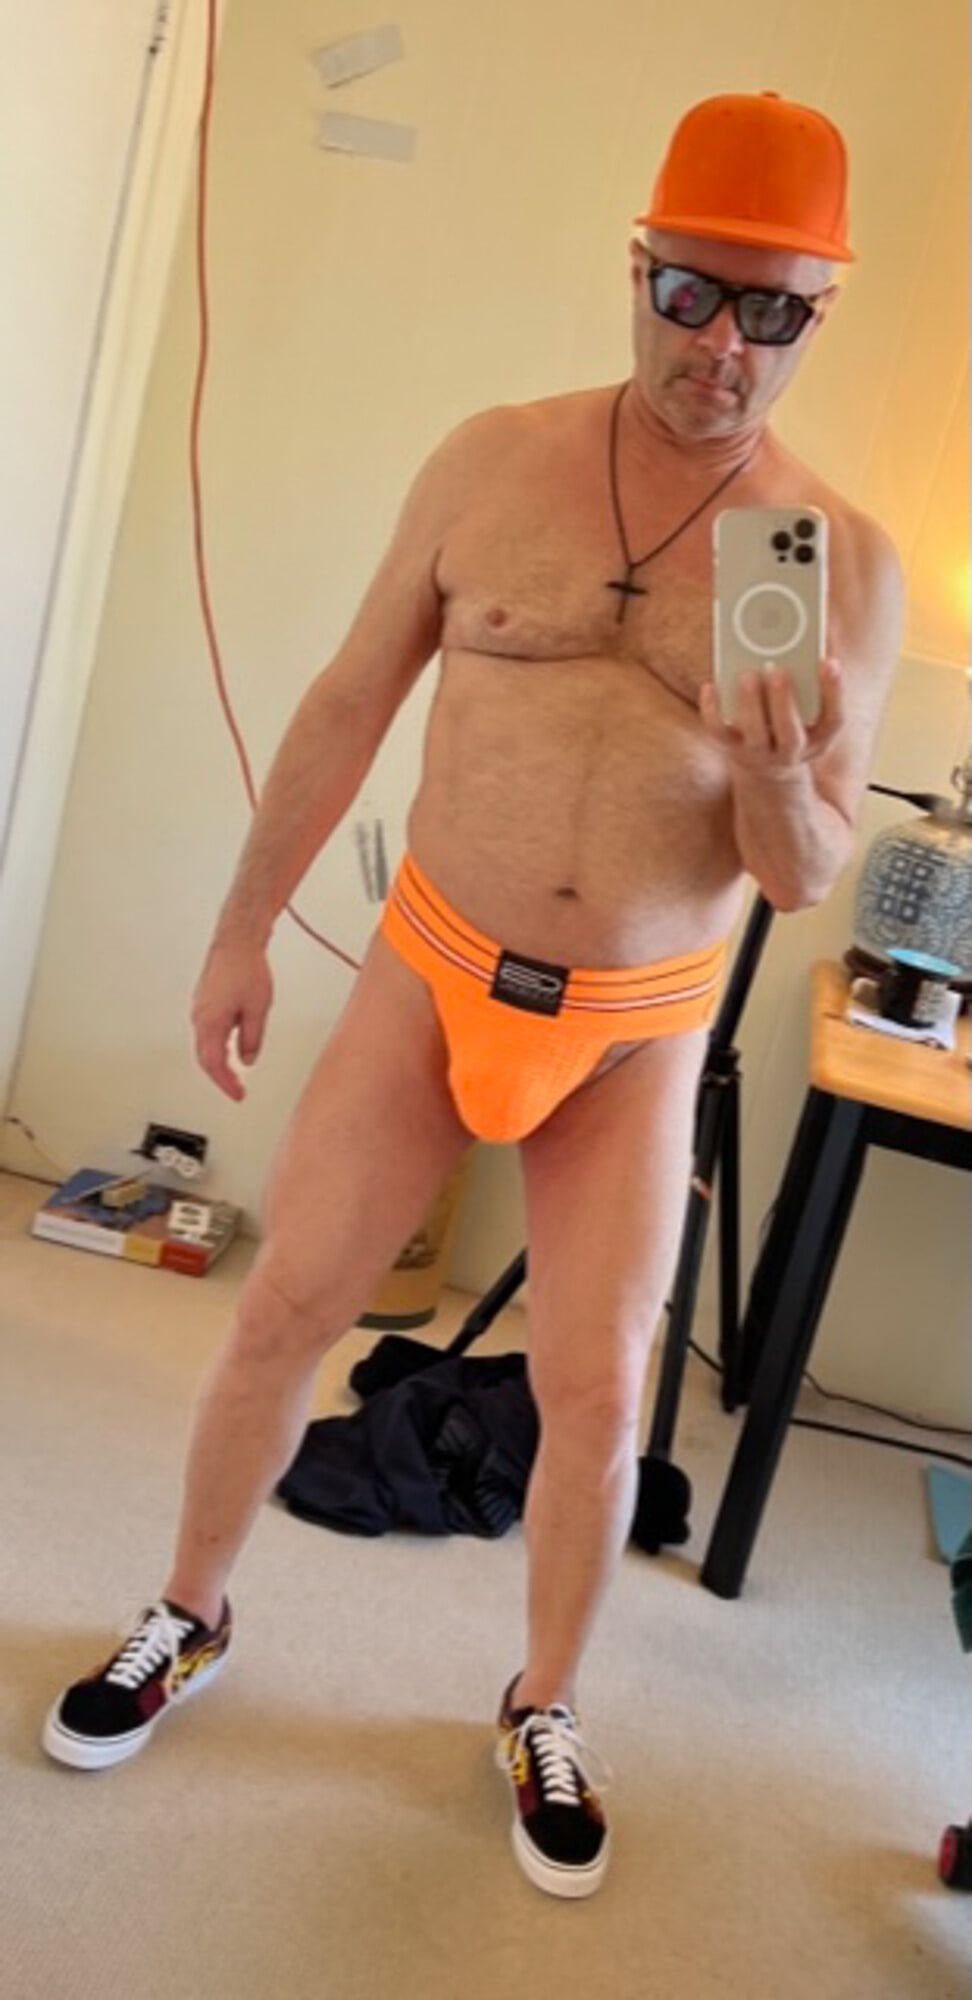 Orange Jock and Cap and, of course, the Prize! #2